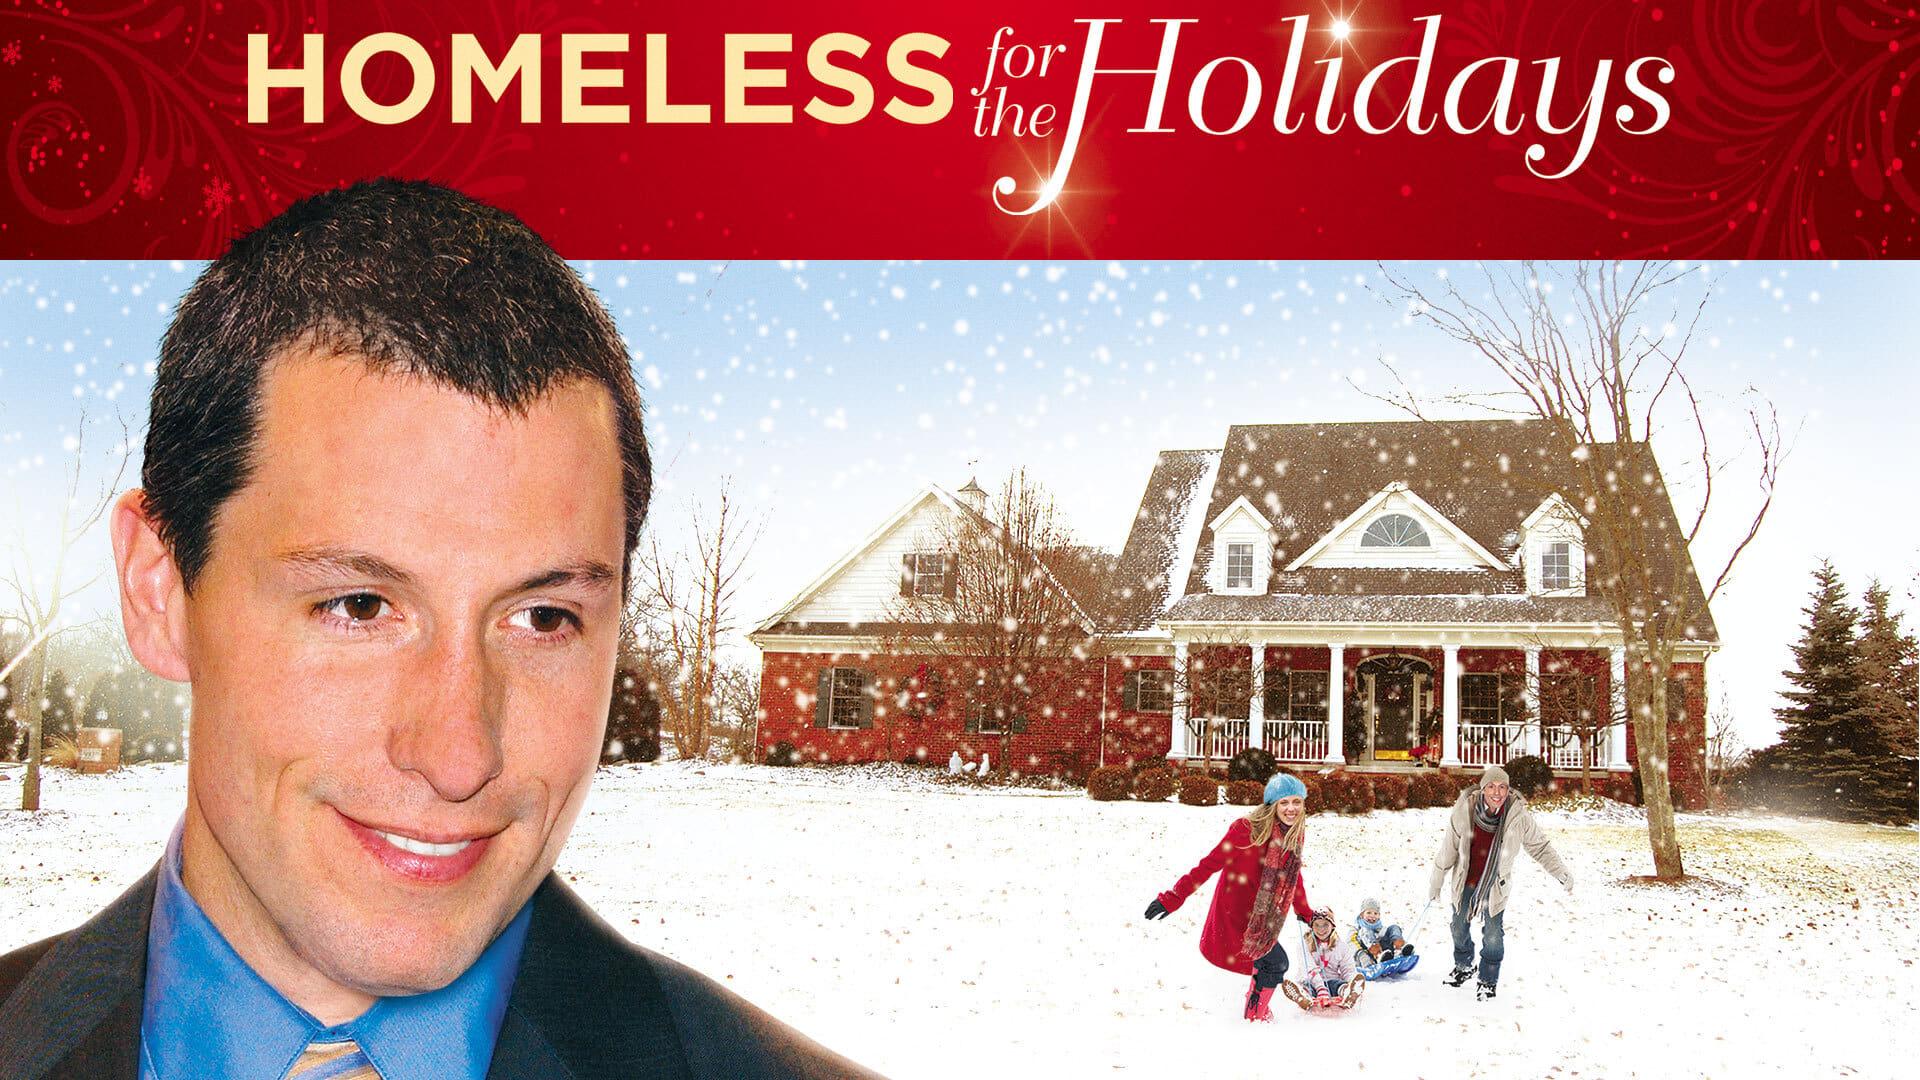 Homeless for the Holidays backdrop